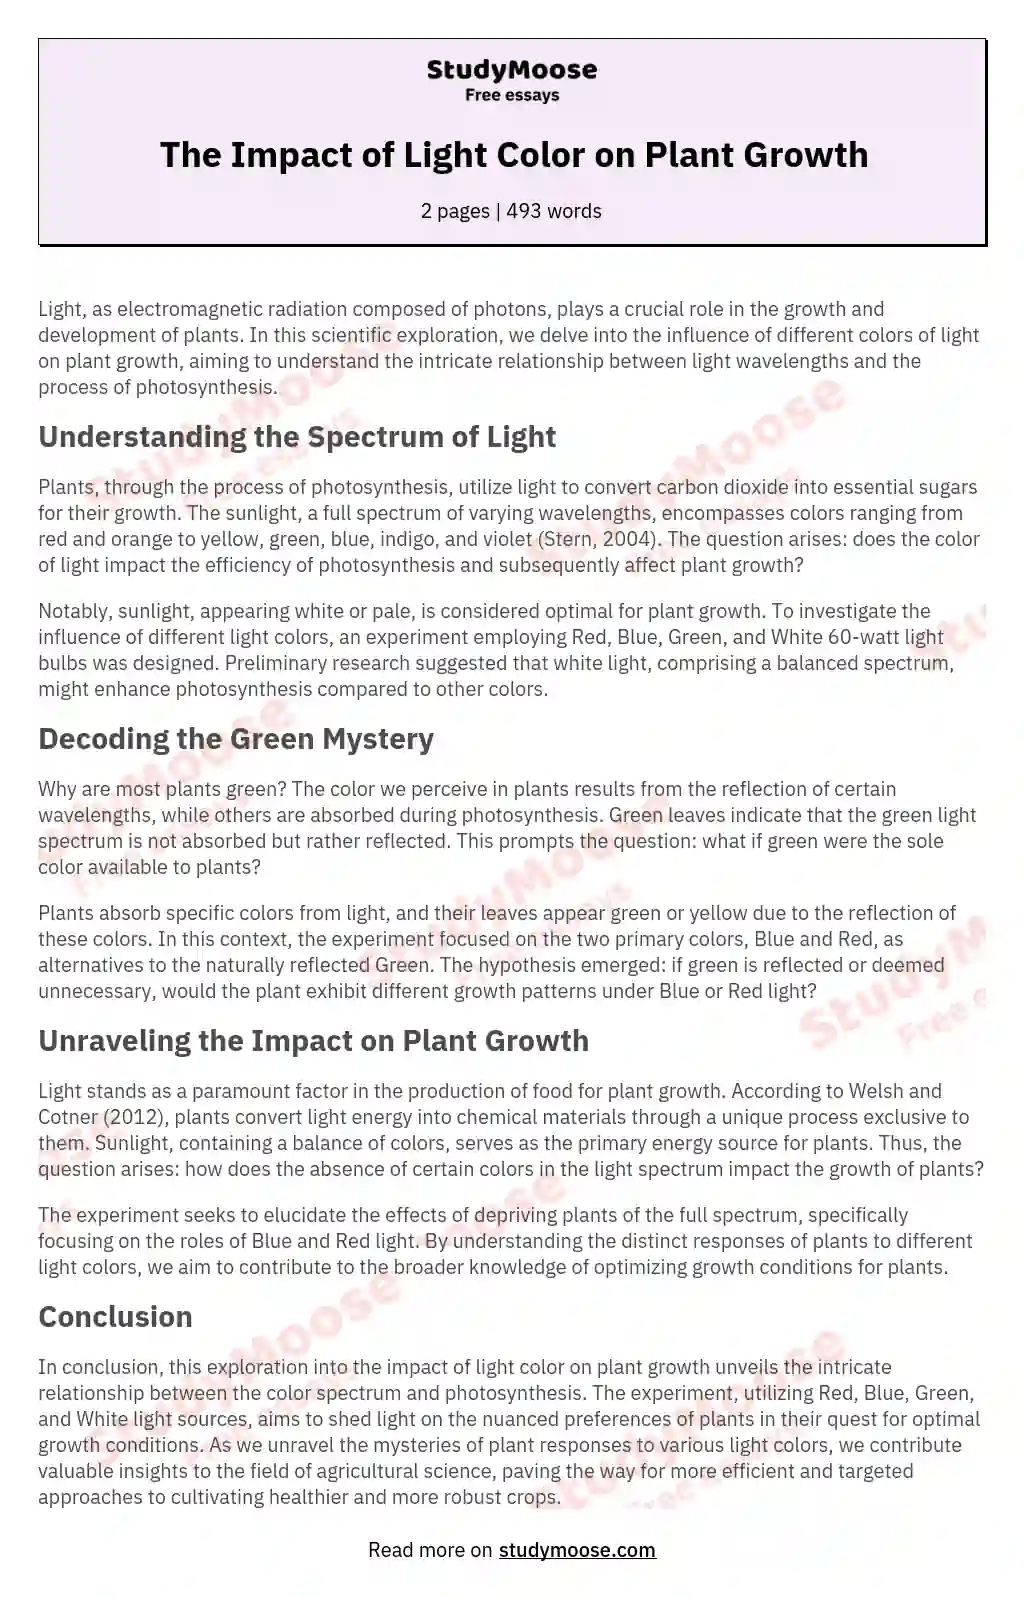 The Impact of Light Color on Plant Growth essay